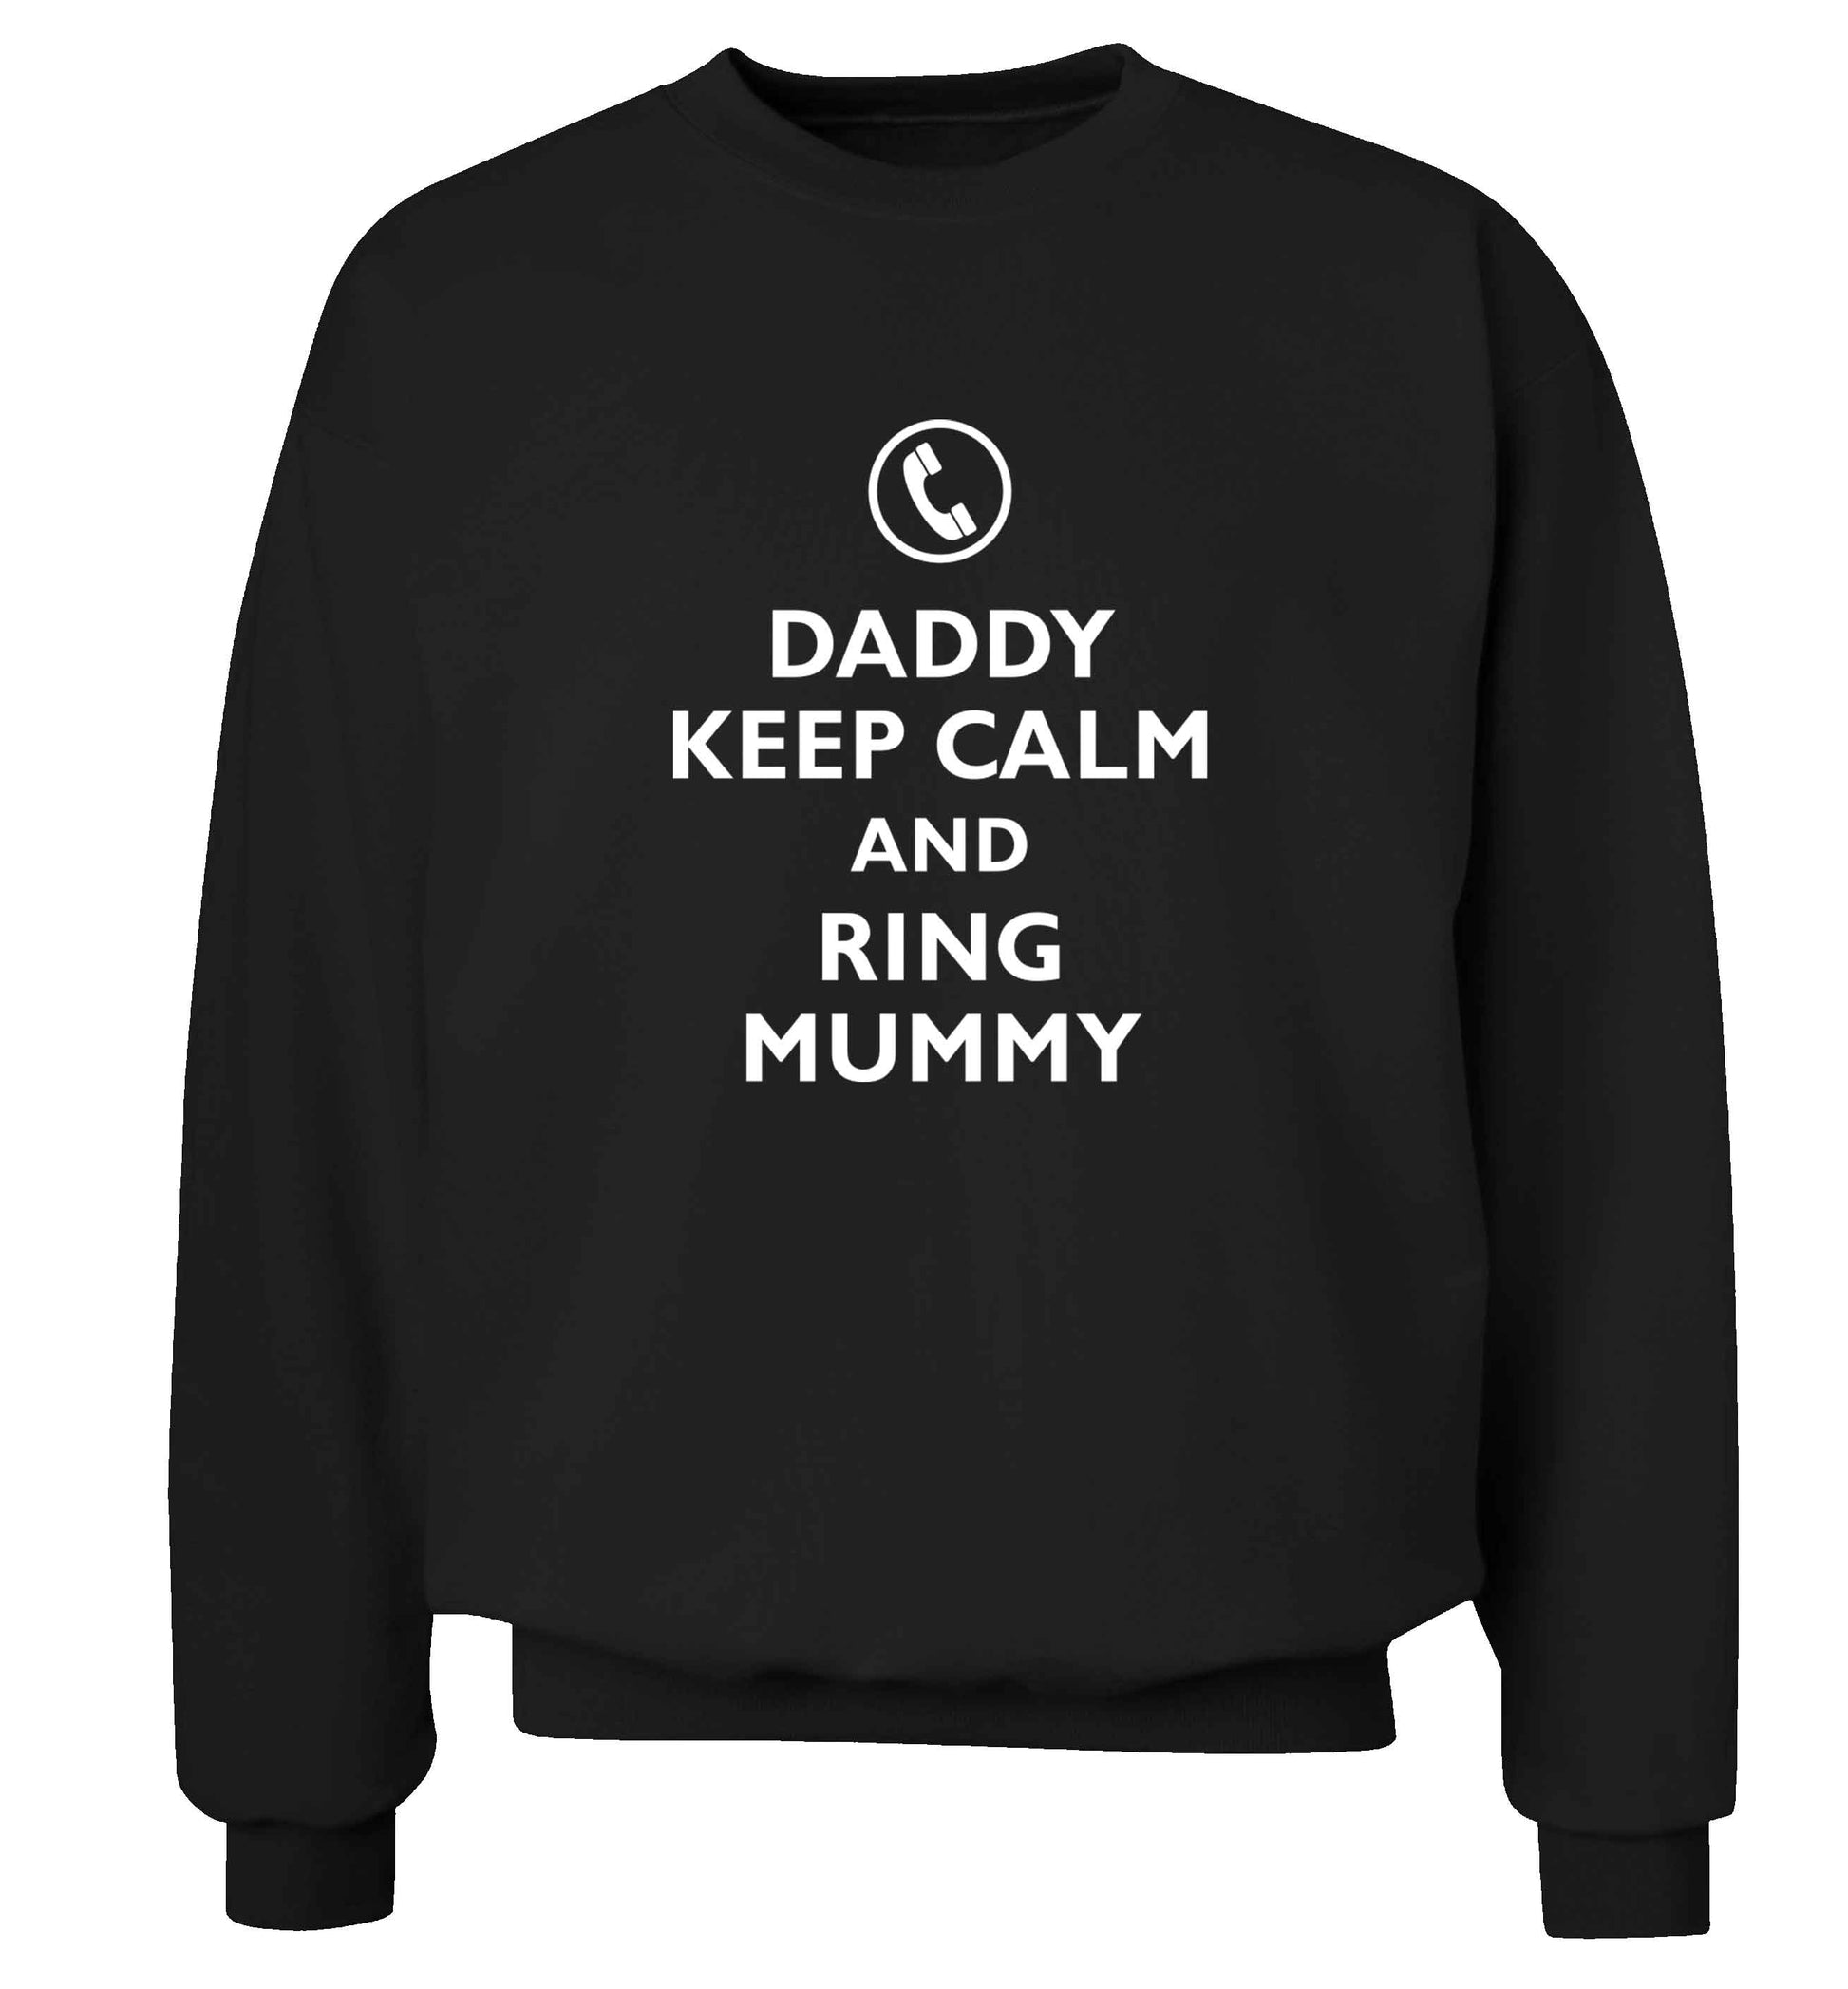 Daddy keep calm and ring mummy adult's unisex black sweater 2XL